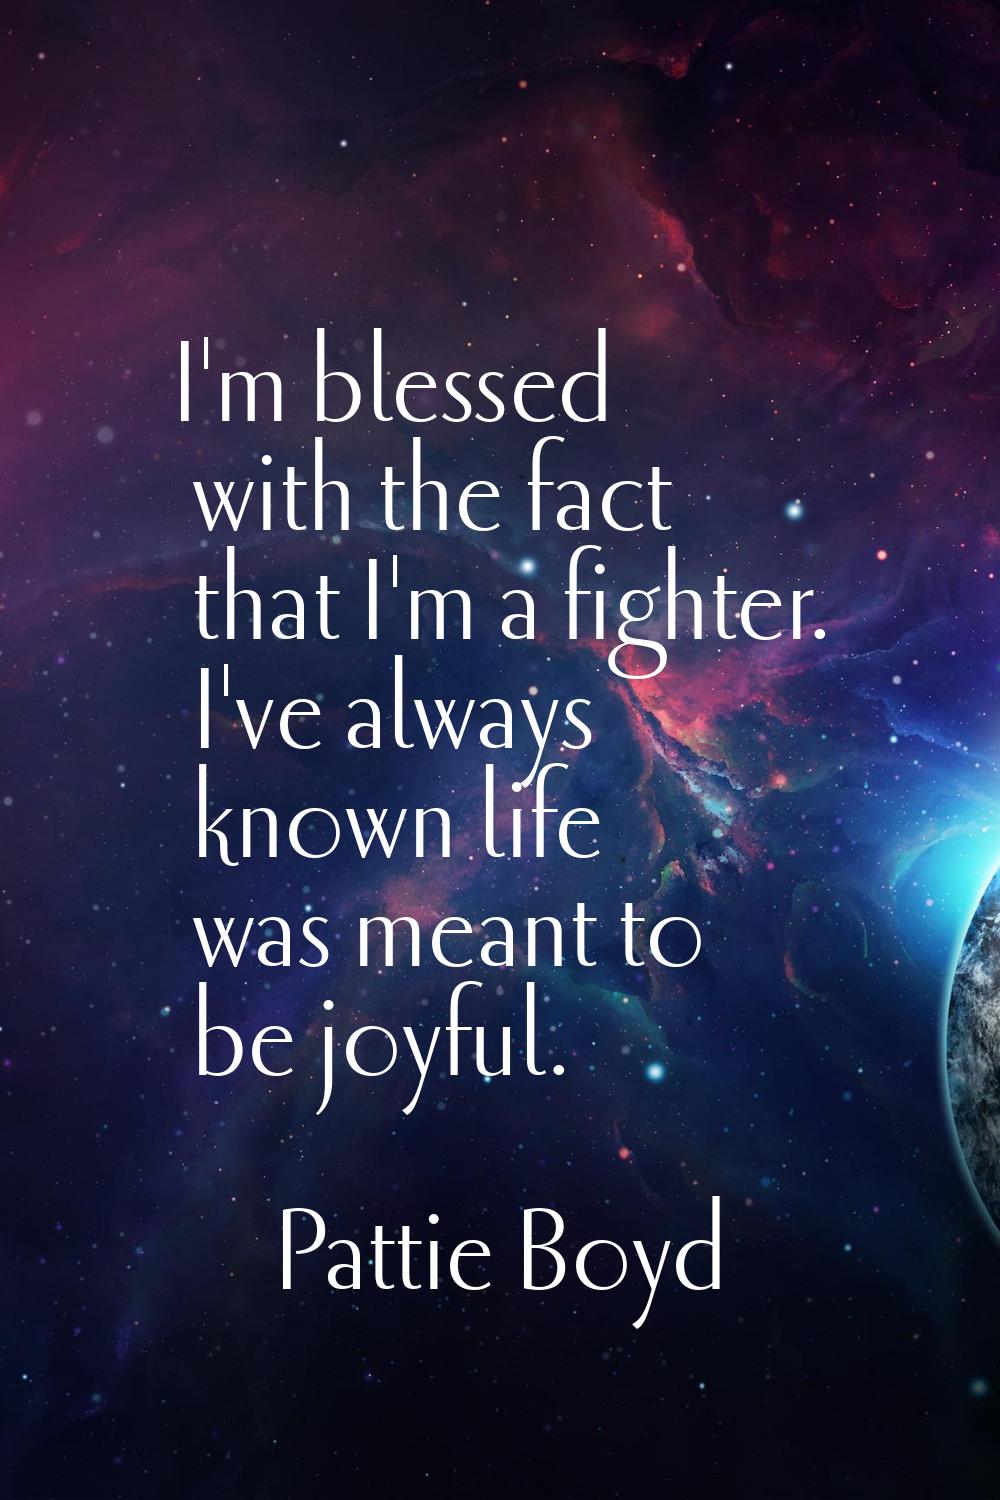 I'm blessed with the fact that I'm a fighter. I've always known life was meant to be joyful.